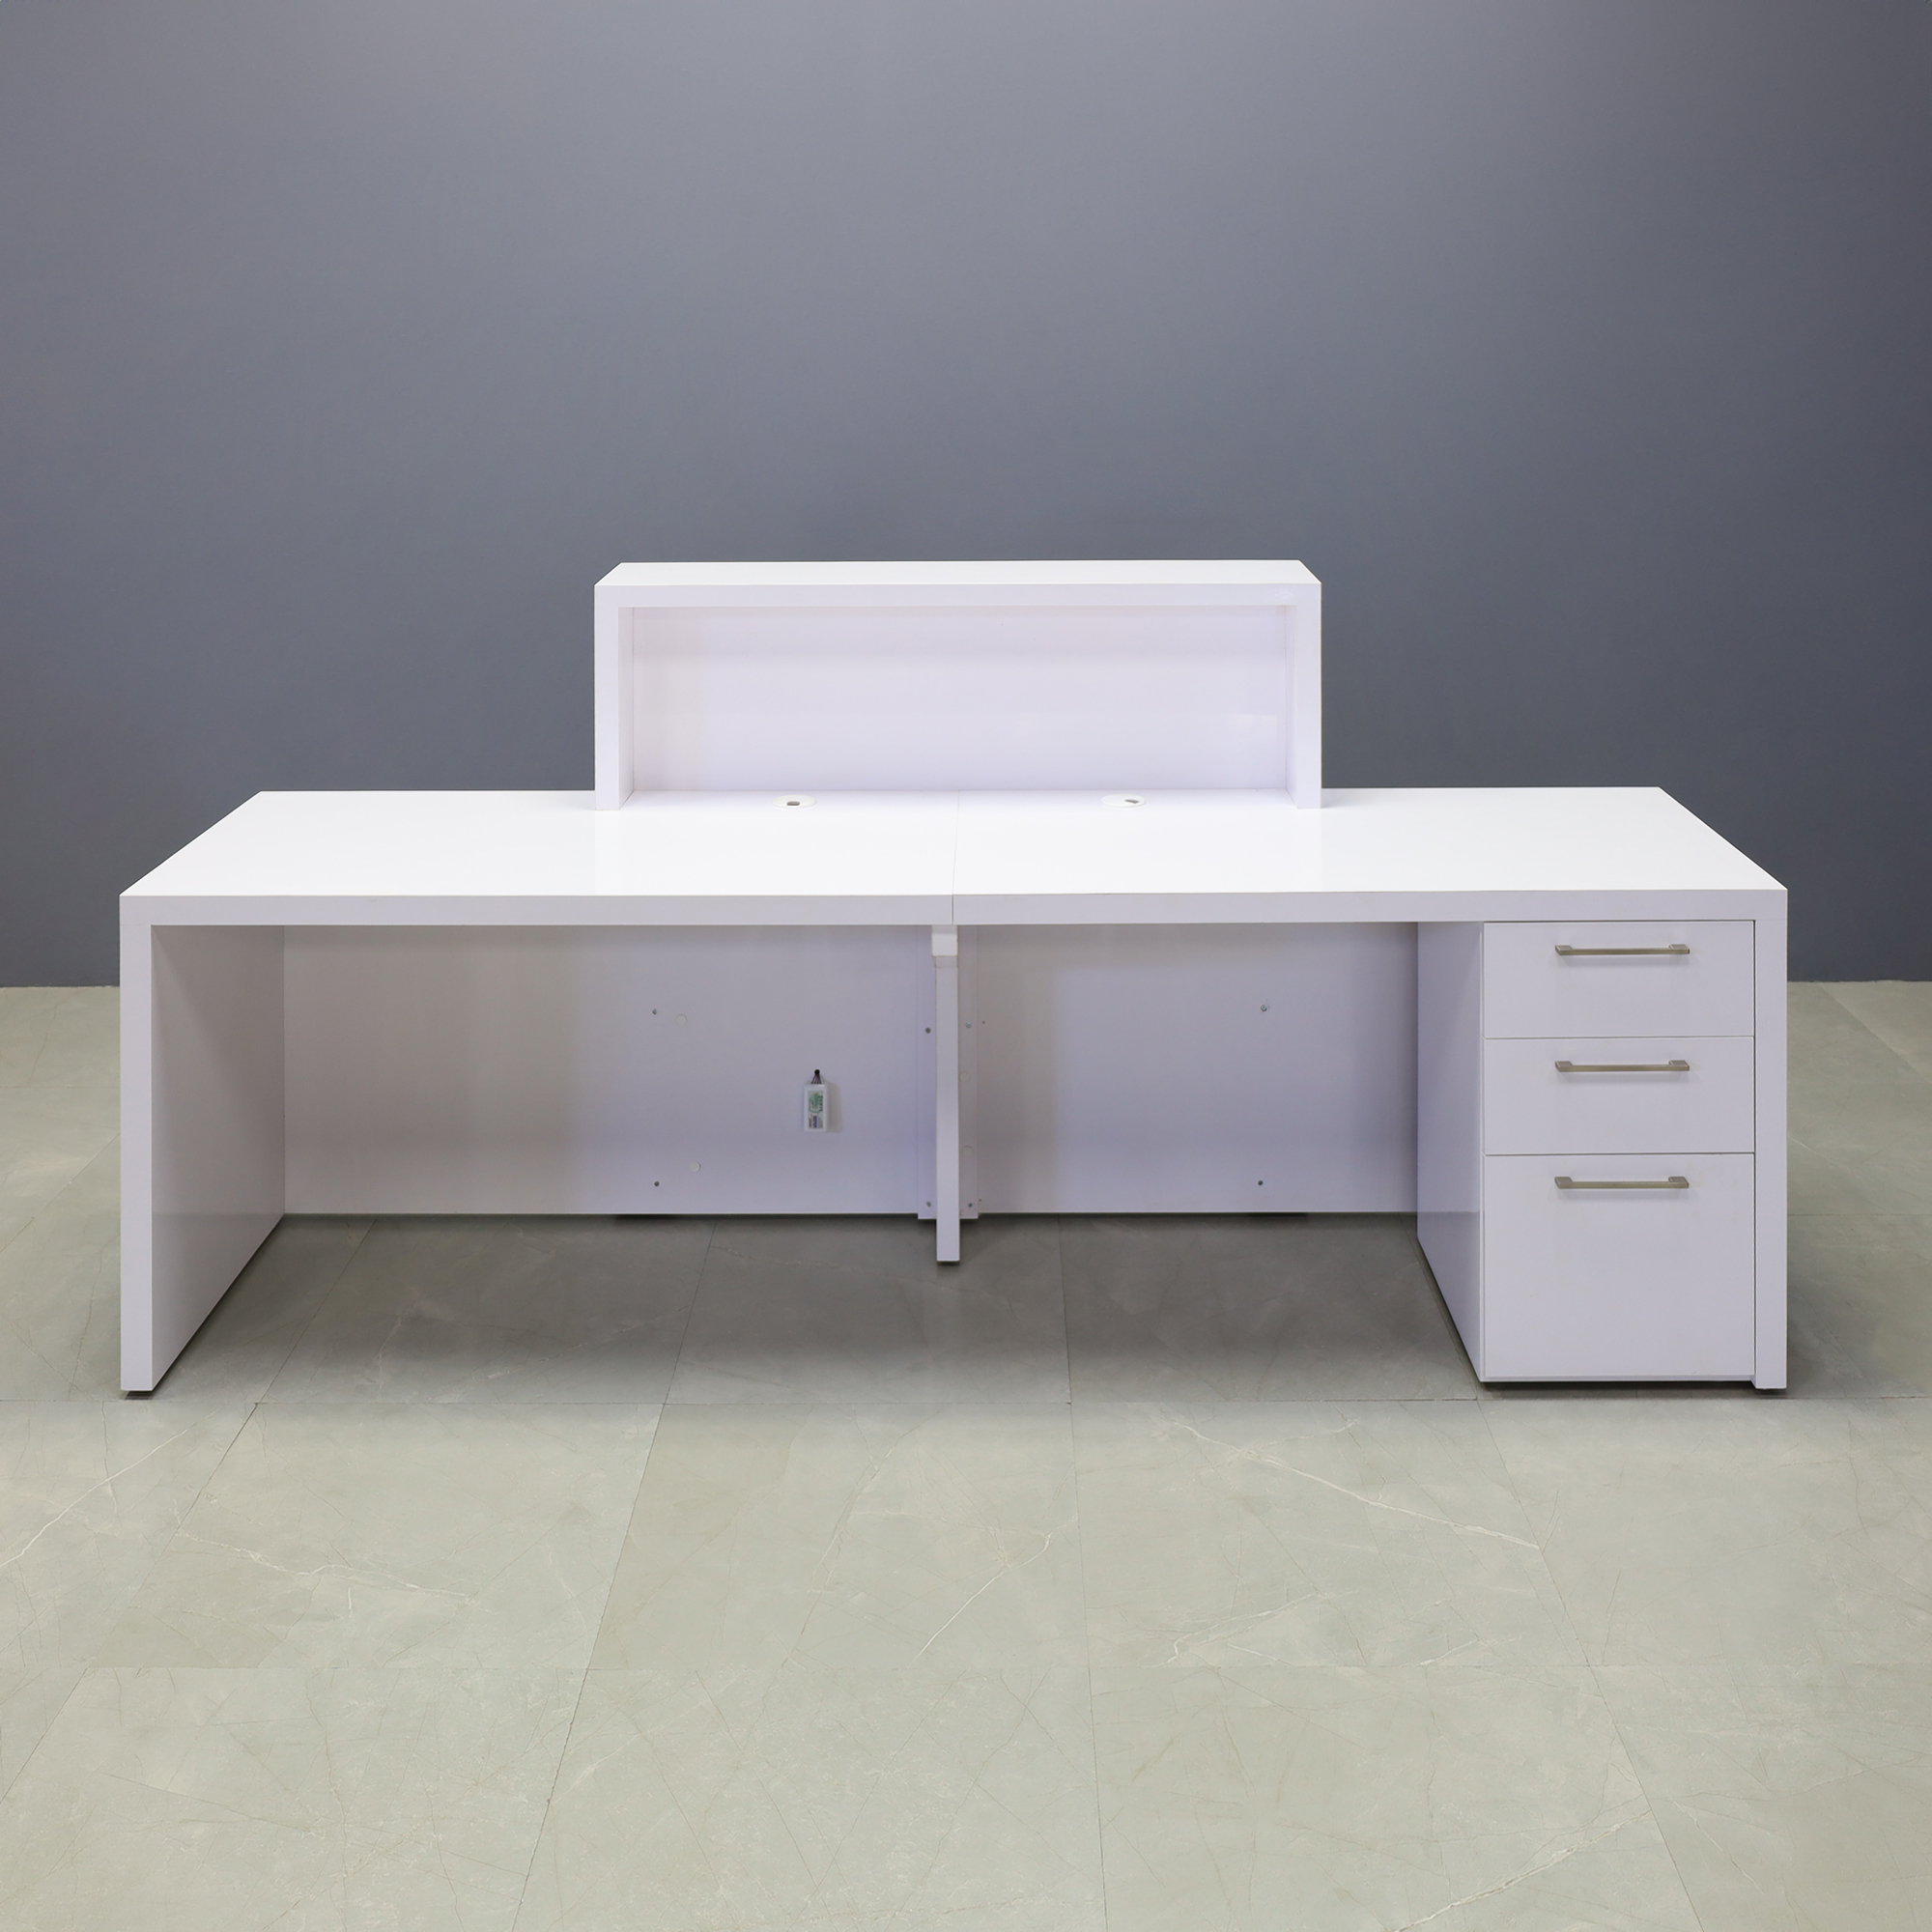 96-inch New York Extra Wide in white gloss laminate main desk and uptown walnut (discontinued) matte laminate recess accent, with multi-colored LED. Built-in storage on right side when sitting, shown here.